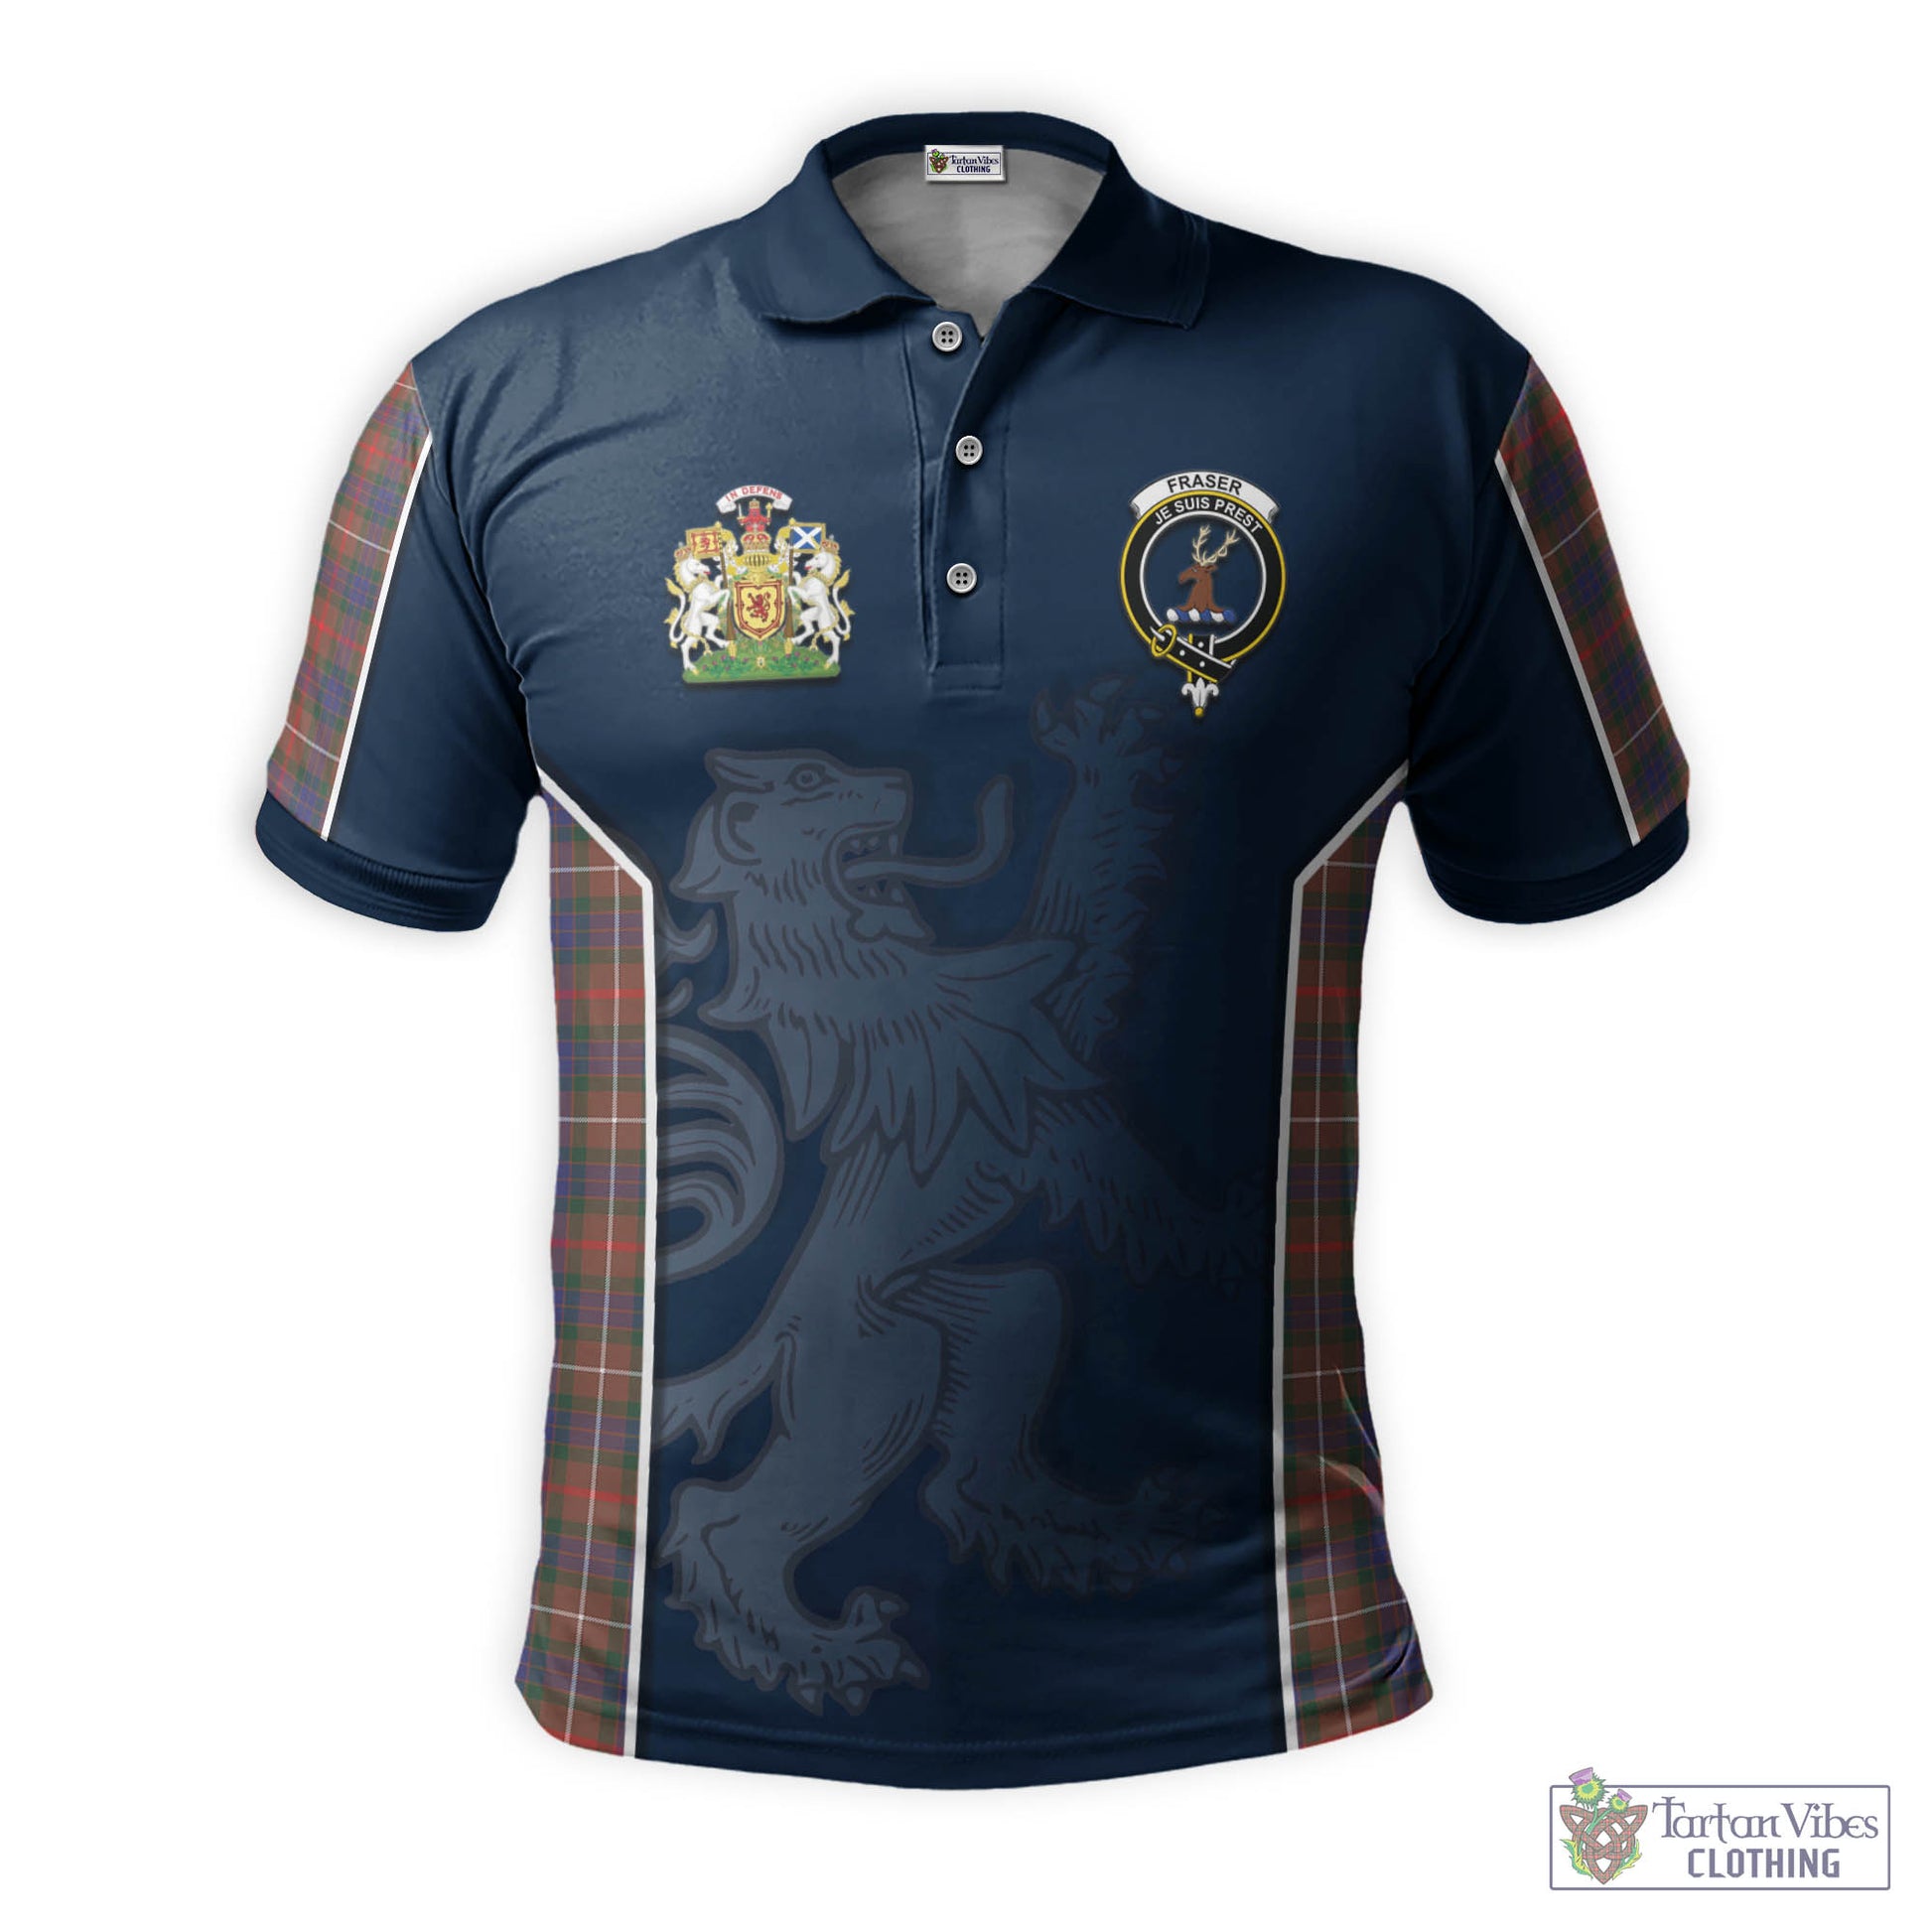 Tartan Vibes Clothing Fraser Hunting Modern Tartan Men's Polo Shirt with Family Crest and Lion Rampant Vibes Sport Style